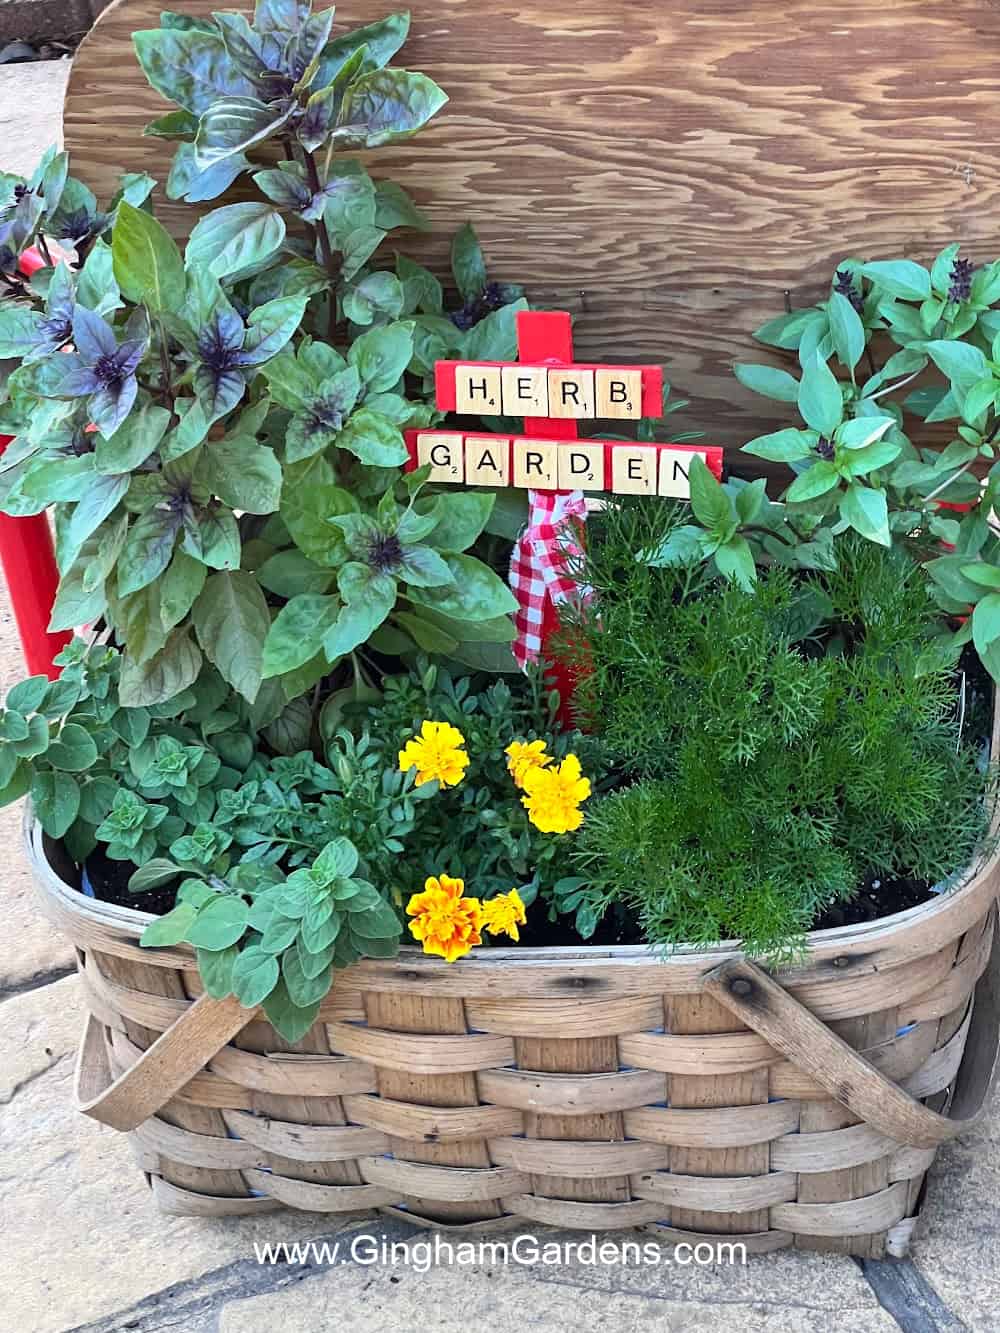 Herb garden planted in a picnic basket with a scrabble tile herb garden sign.